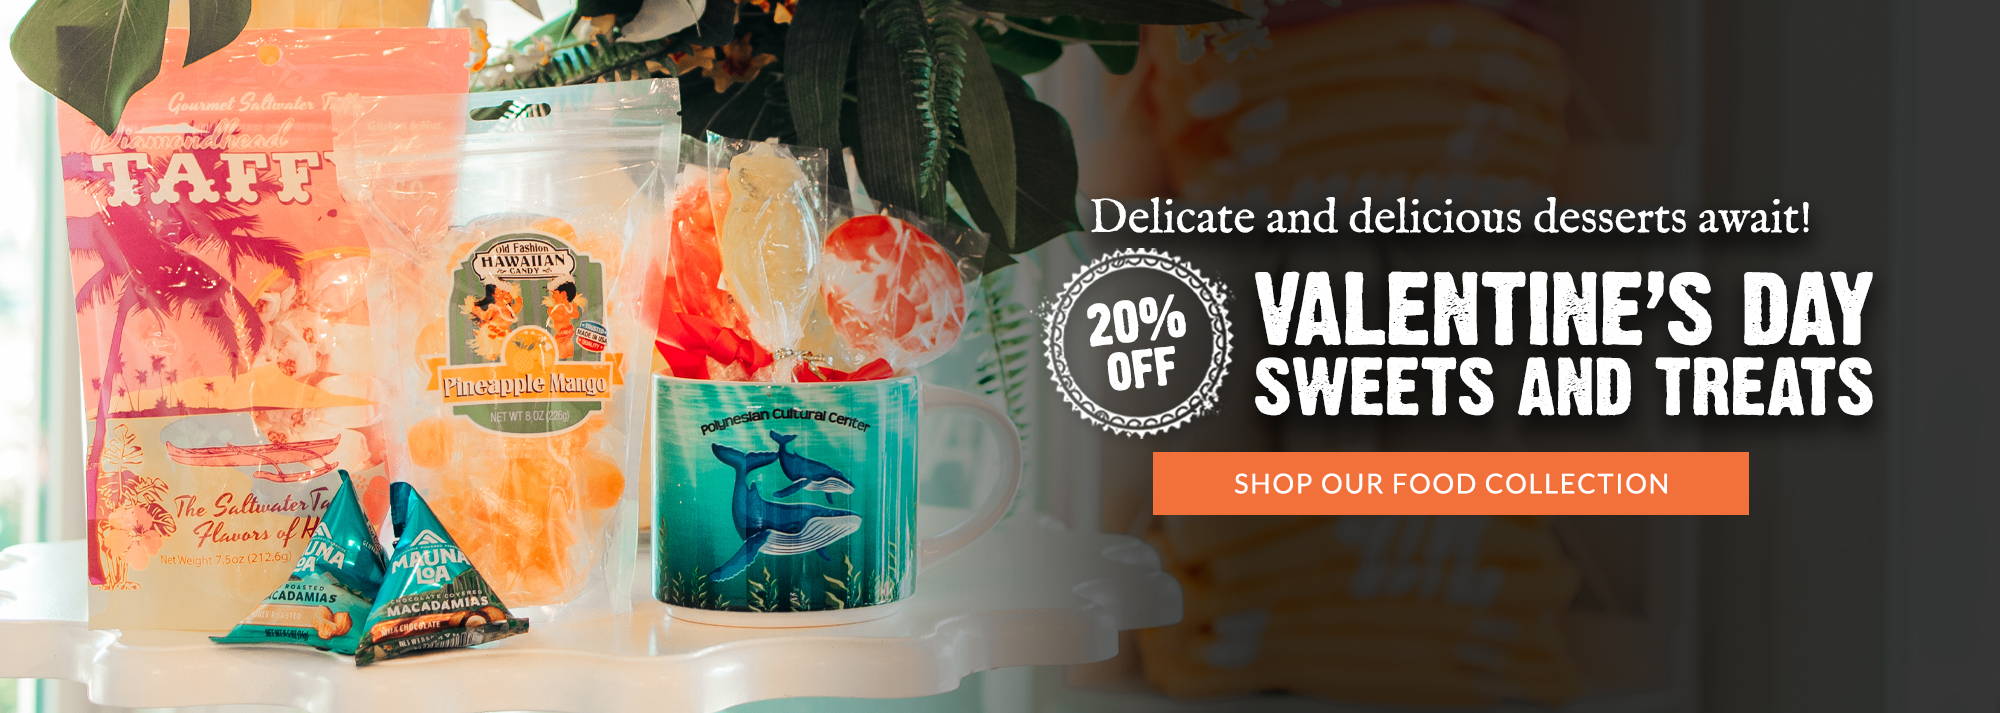 Delicate and delicious desserts await! Get 20% off Valentine's Day sweets & treats!